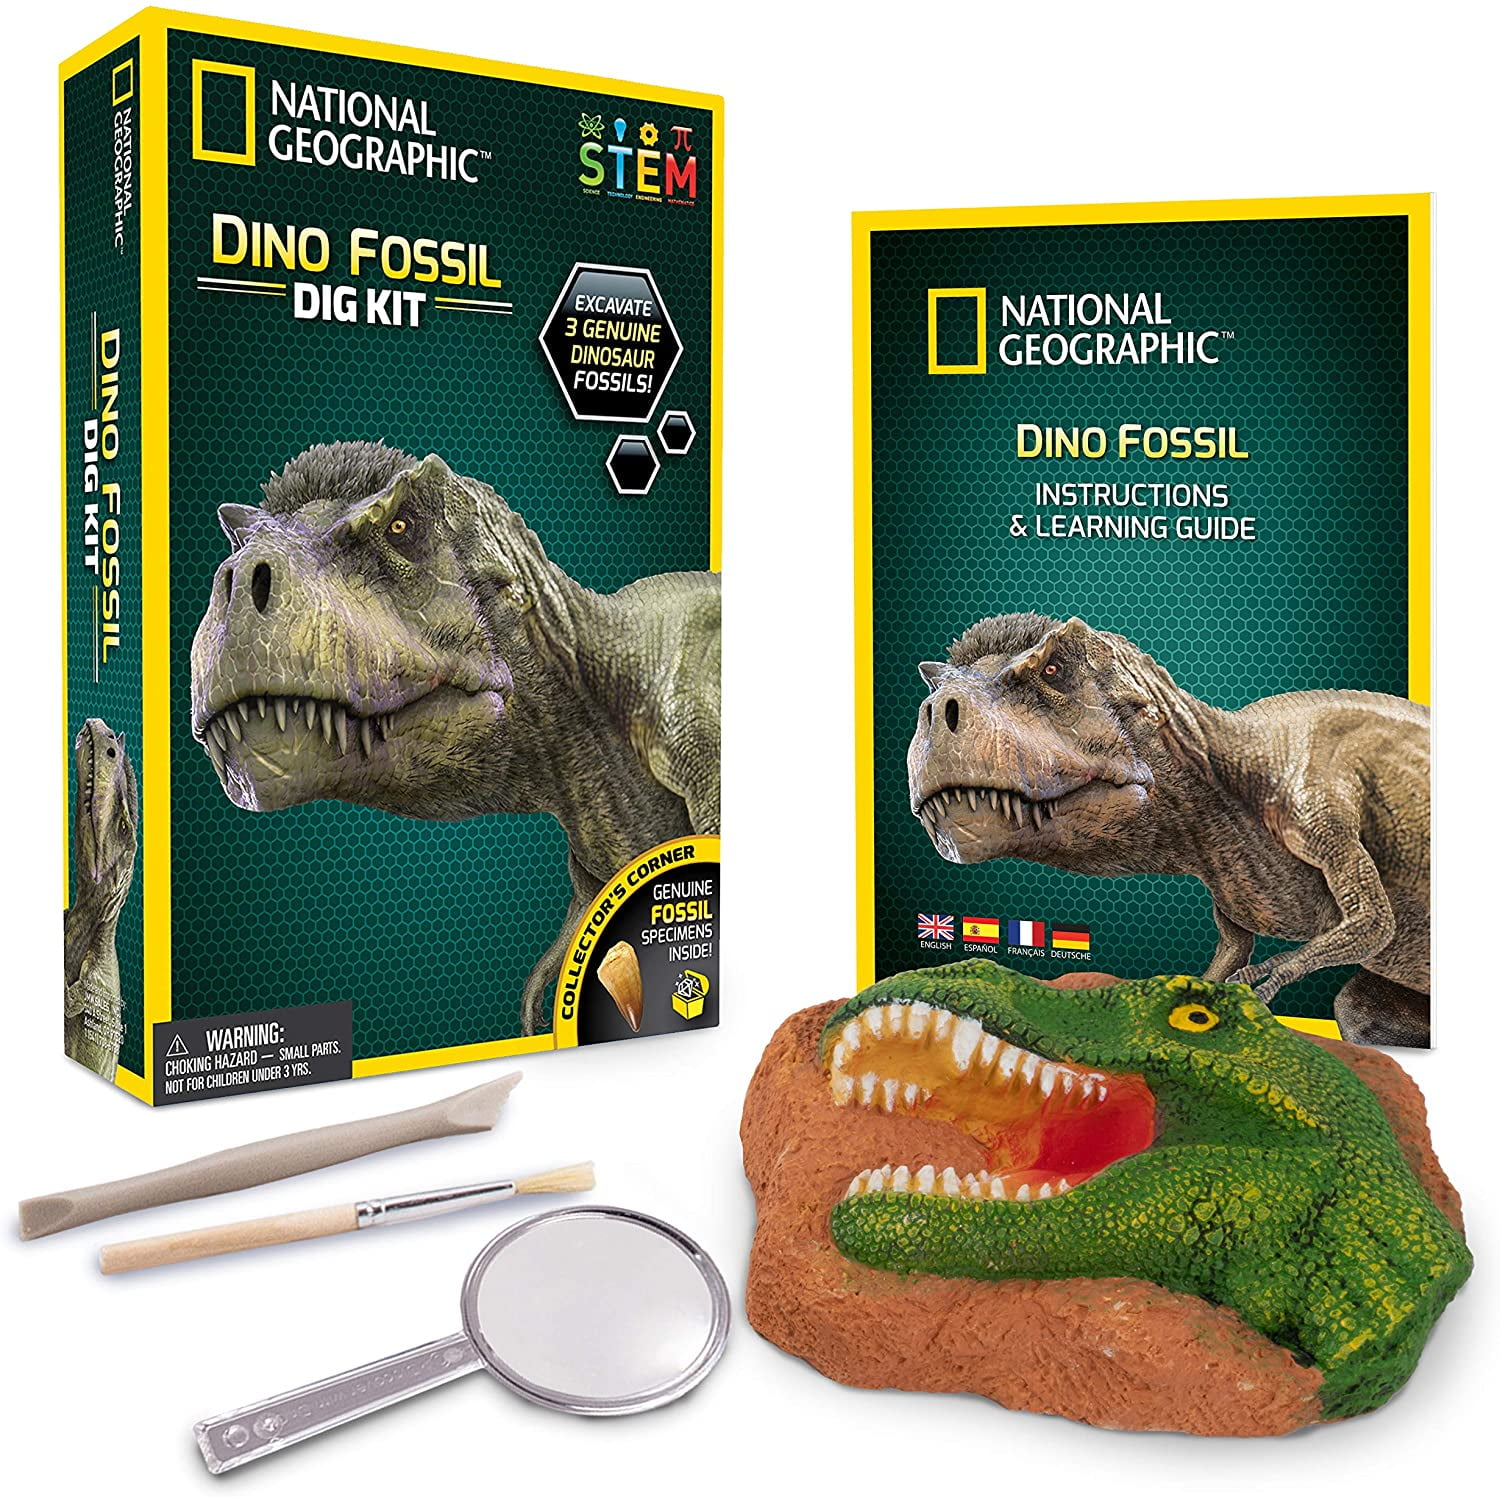 Excavate 15 real fossils including D NATIONAL GEOGRAPHIC Mega Fossil Dig Kit 